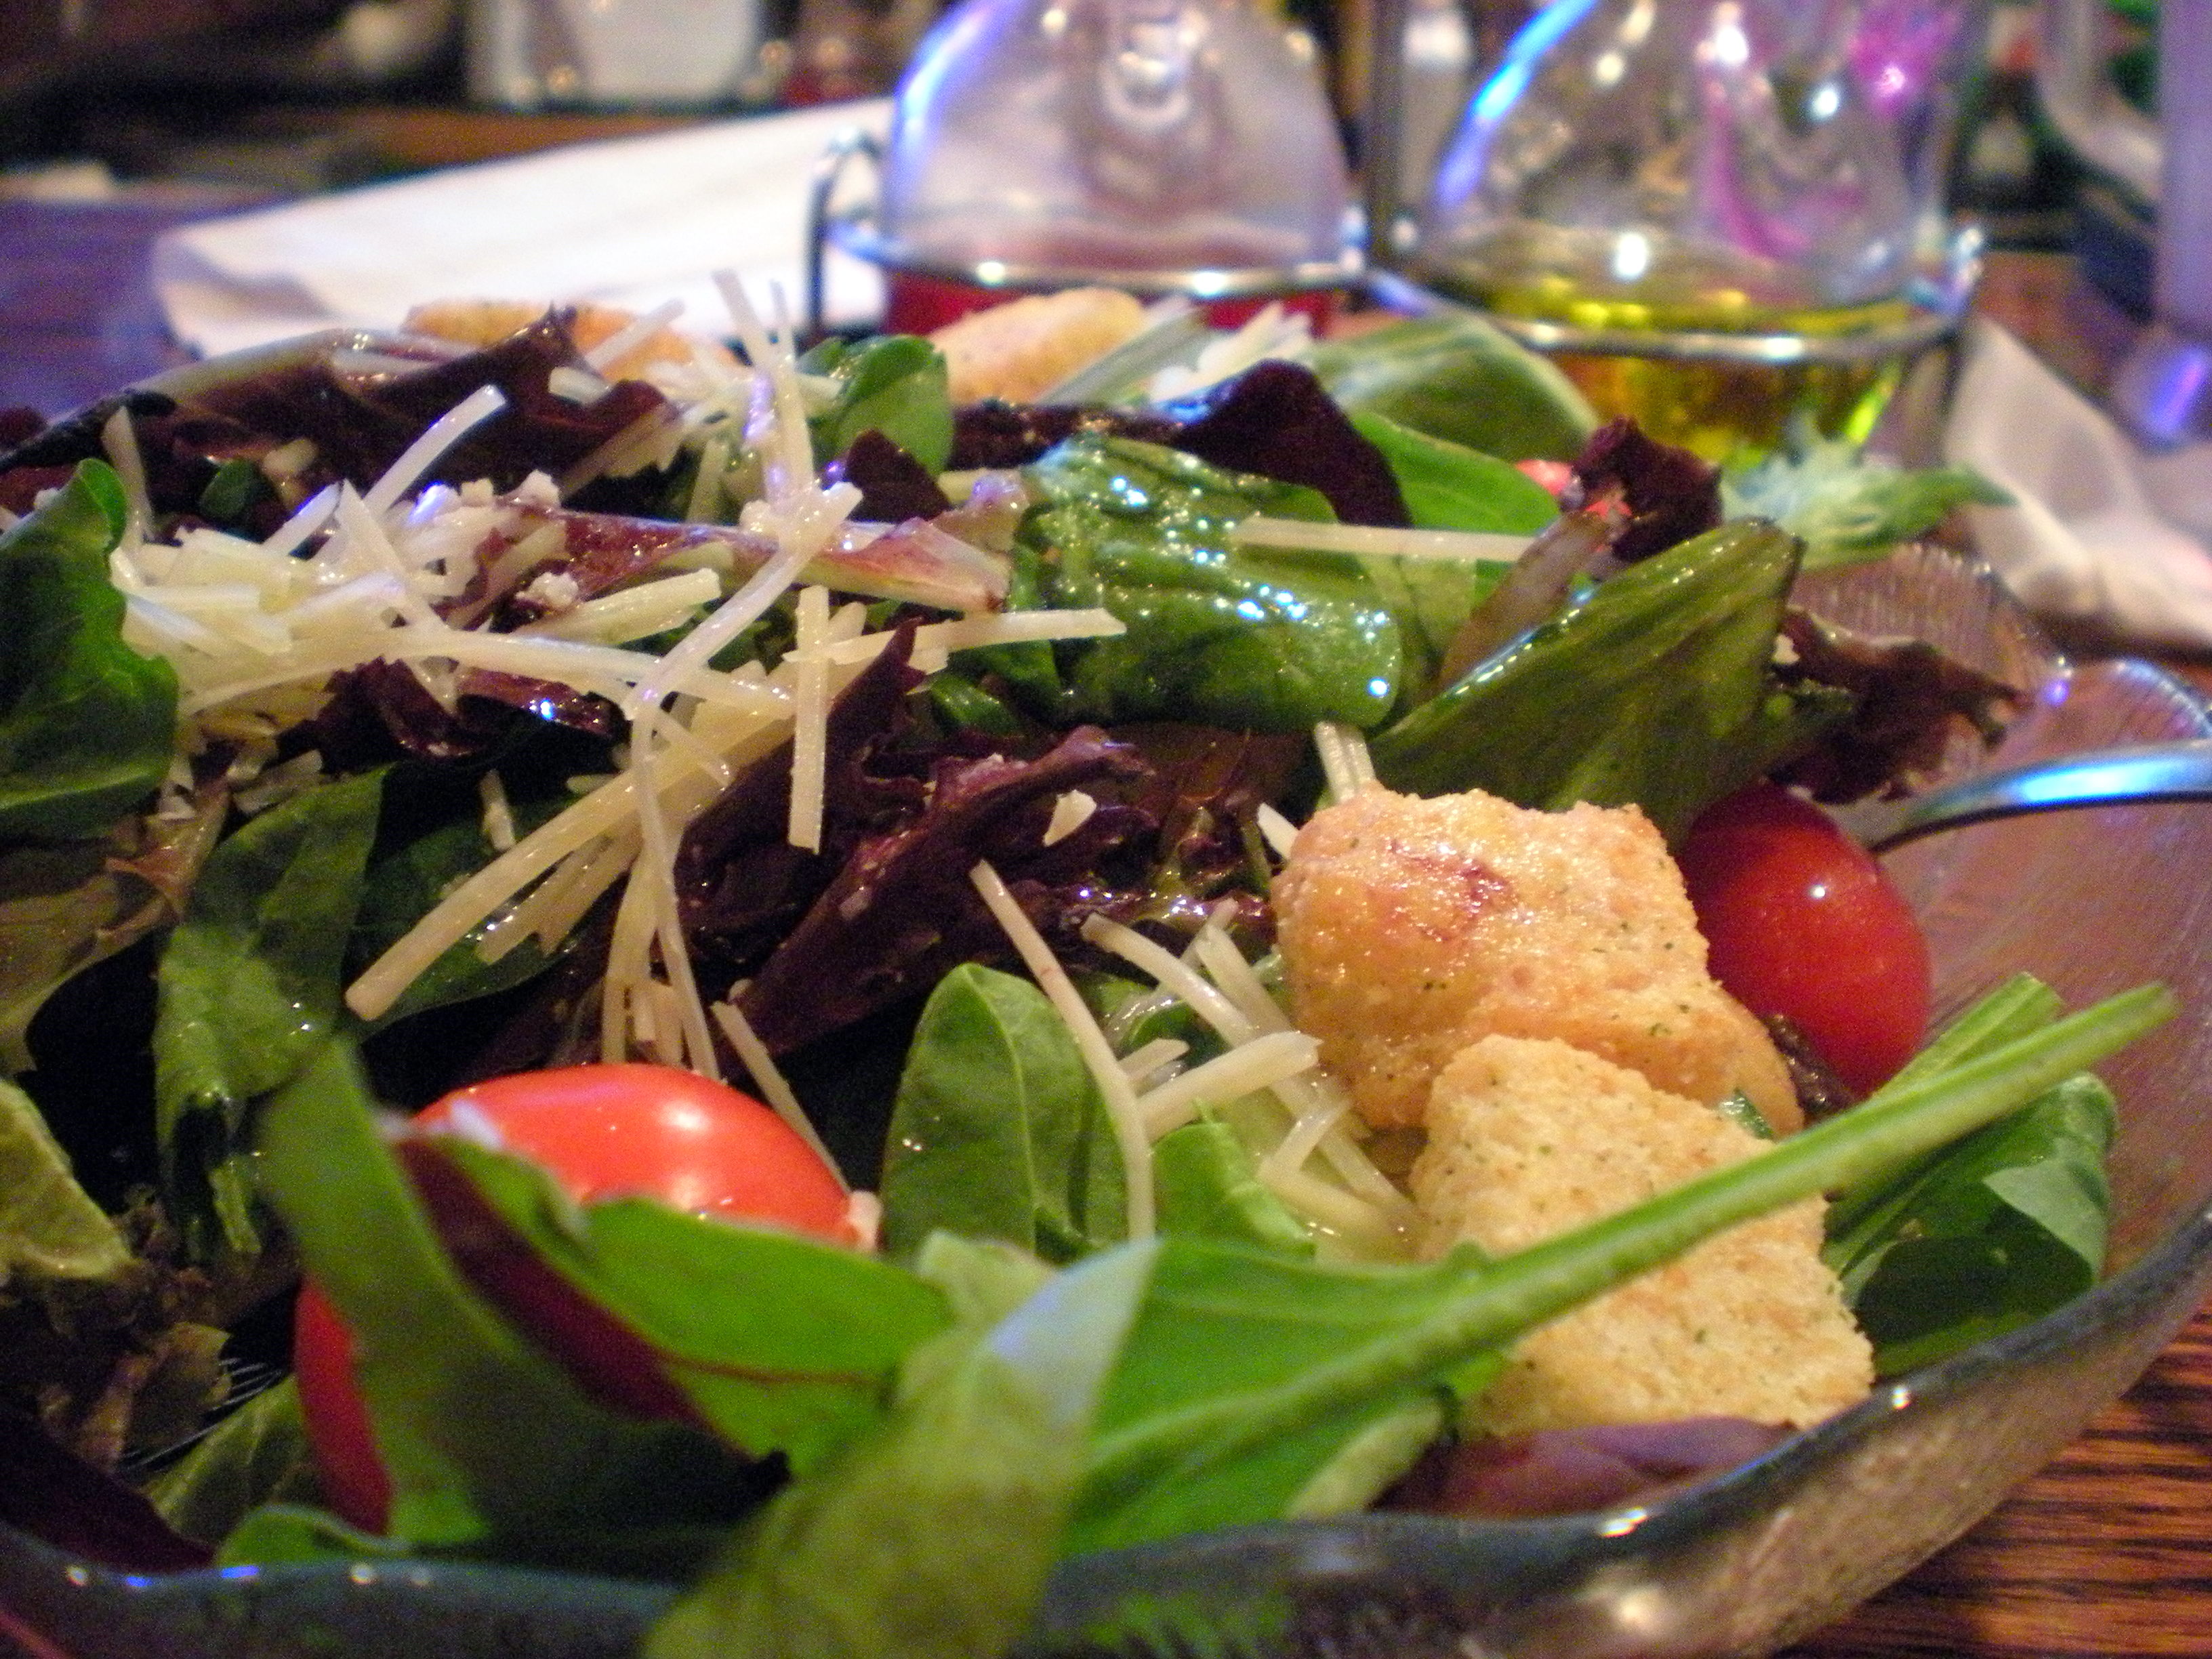 Ted and Joanne: A mixed baby green salad to share (included)